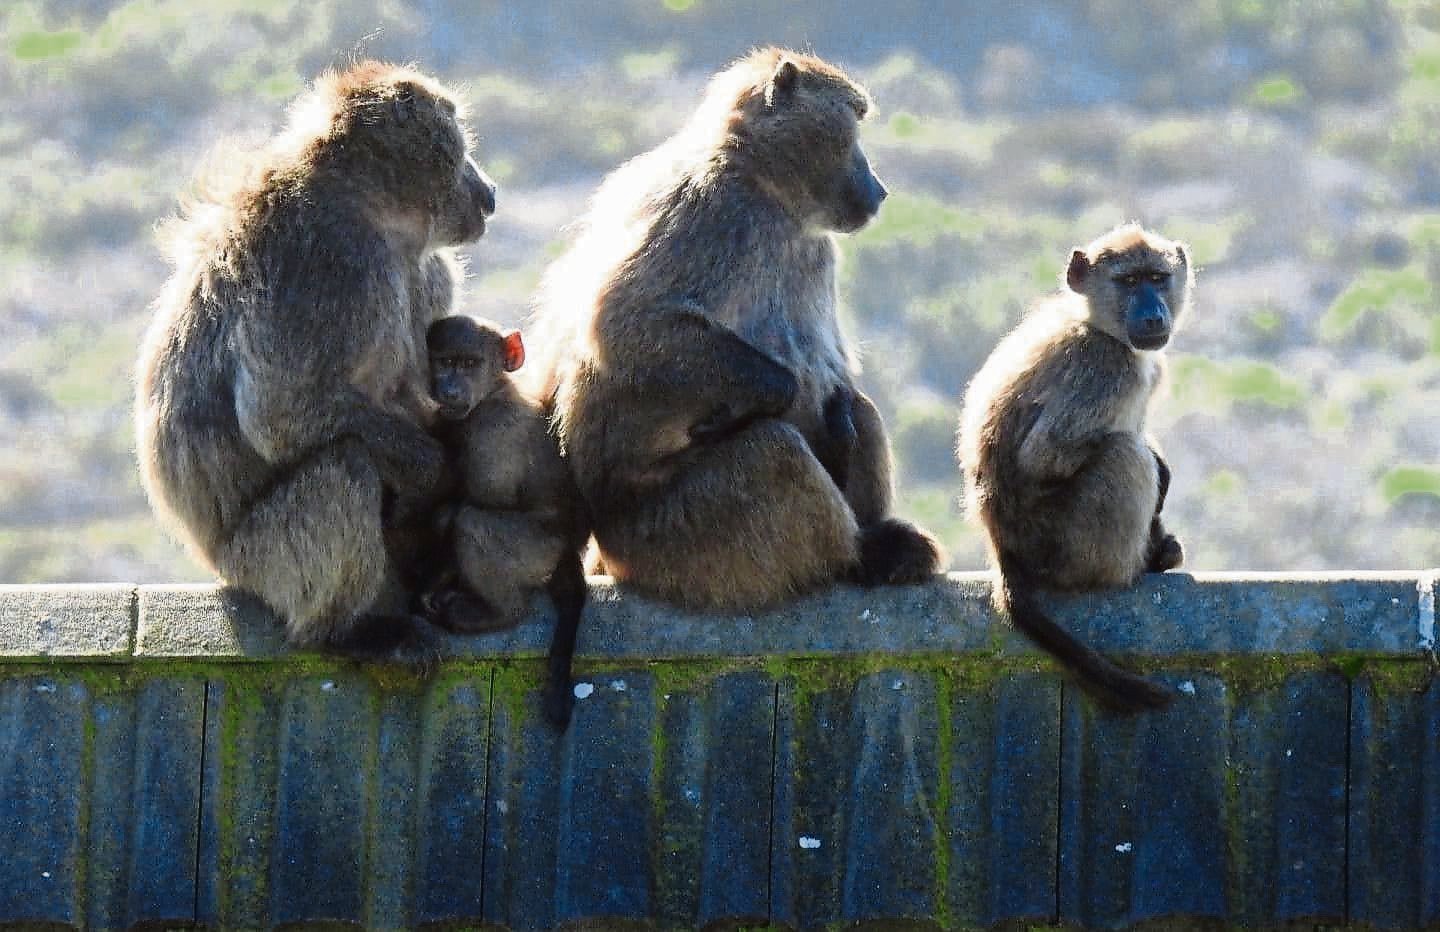 News24 | Outrage over euthanasia of baboons in South Peninsula